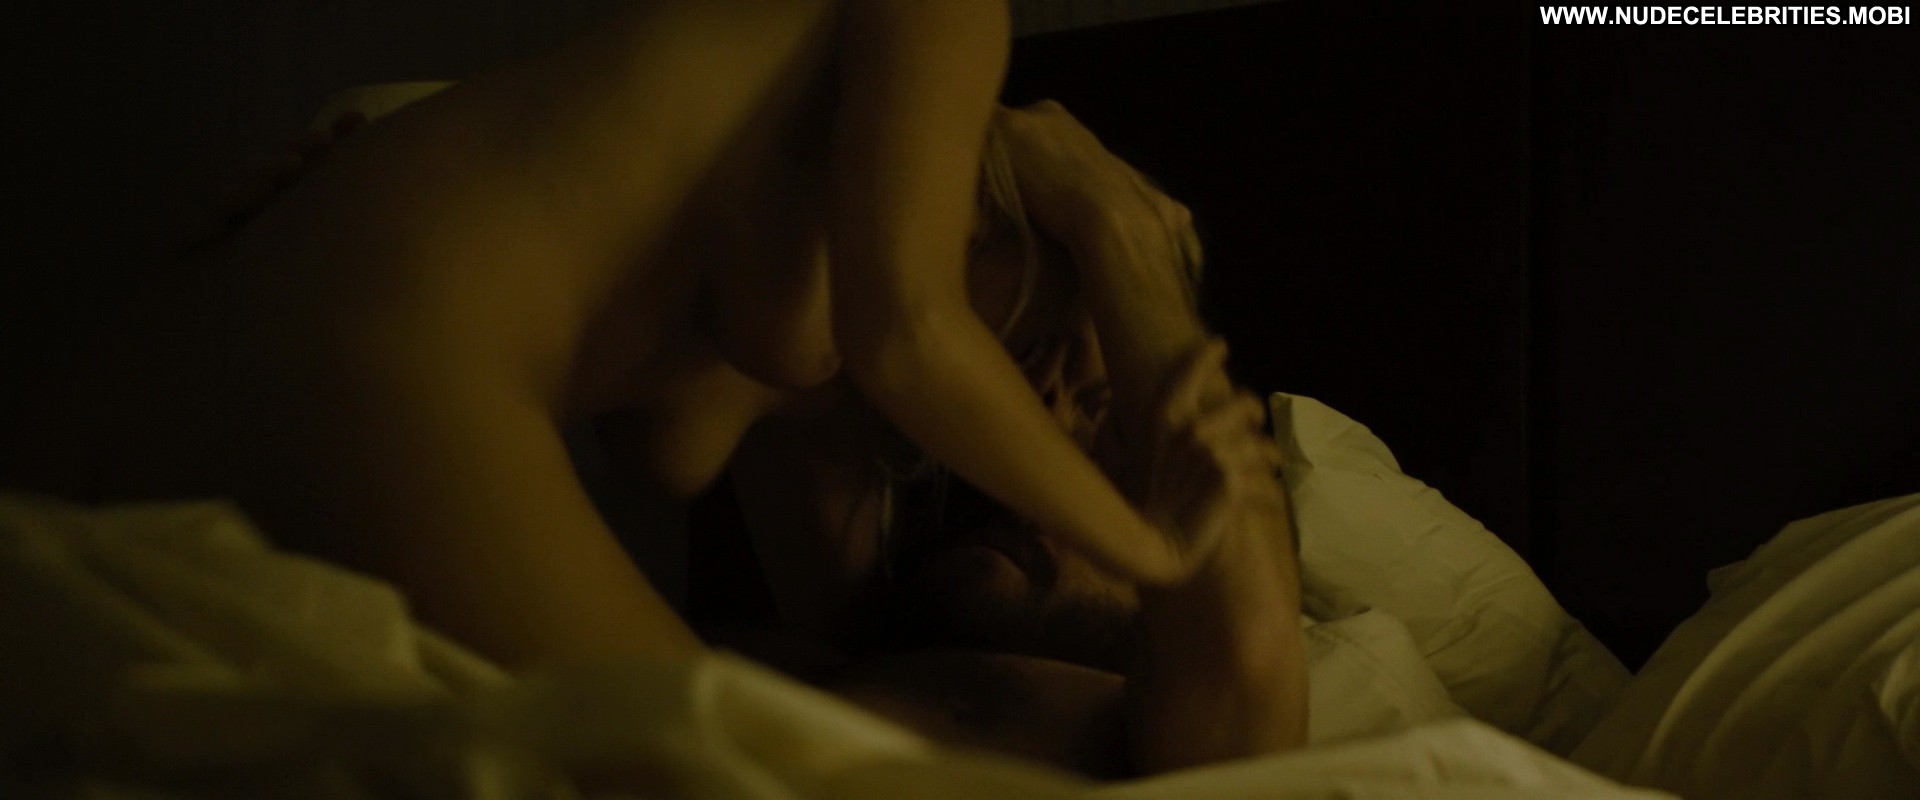 Enemy Melanie Laurent Ass Breasts Bed Pregnant Celebrity 